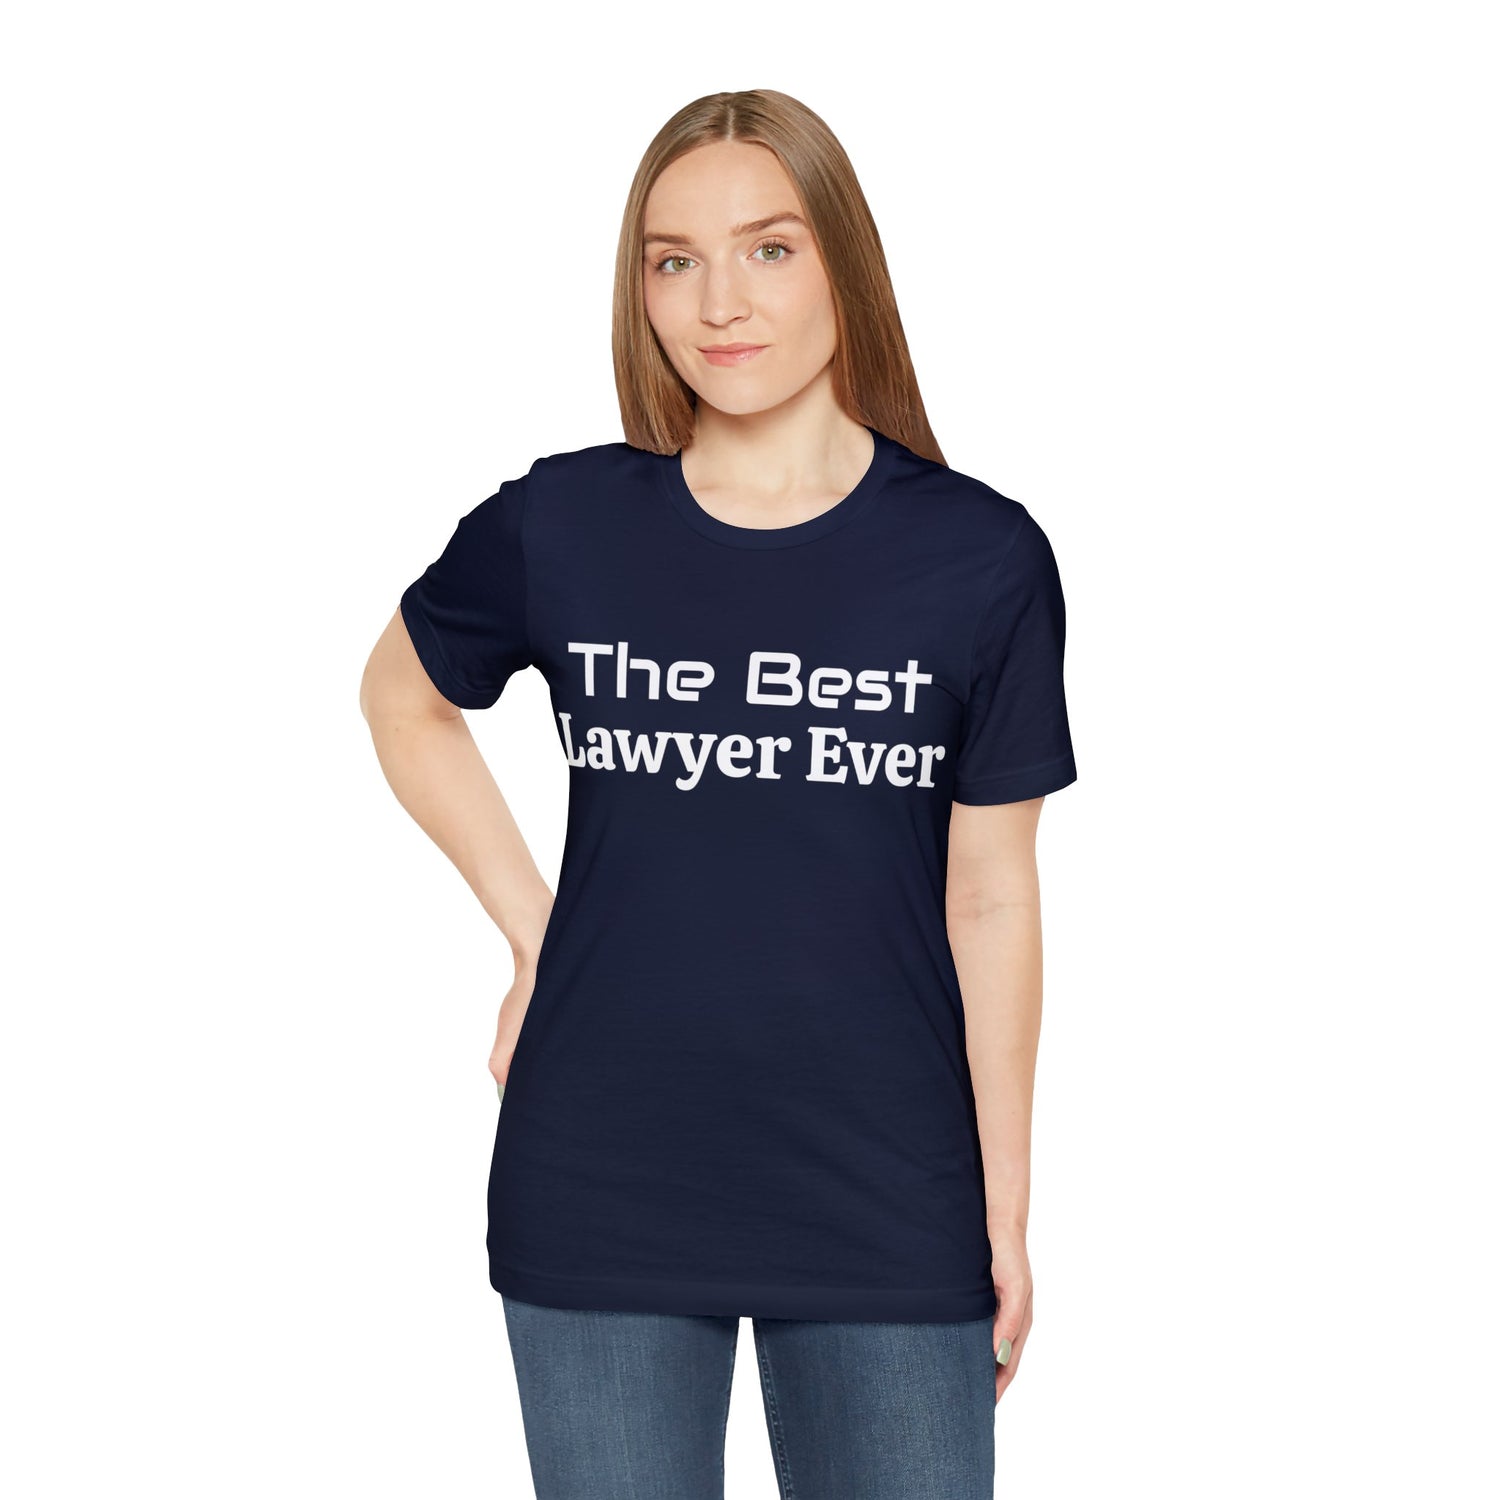 T-Shirt Tshirt Gift for Friends and Family Short Sleeve T Shirt Petrova Designs